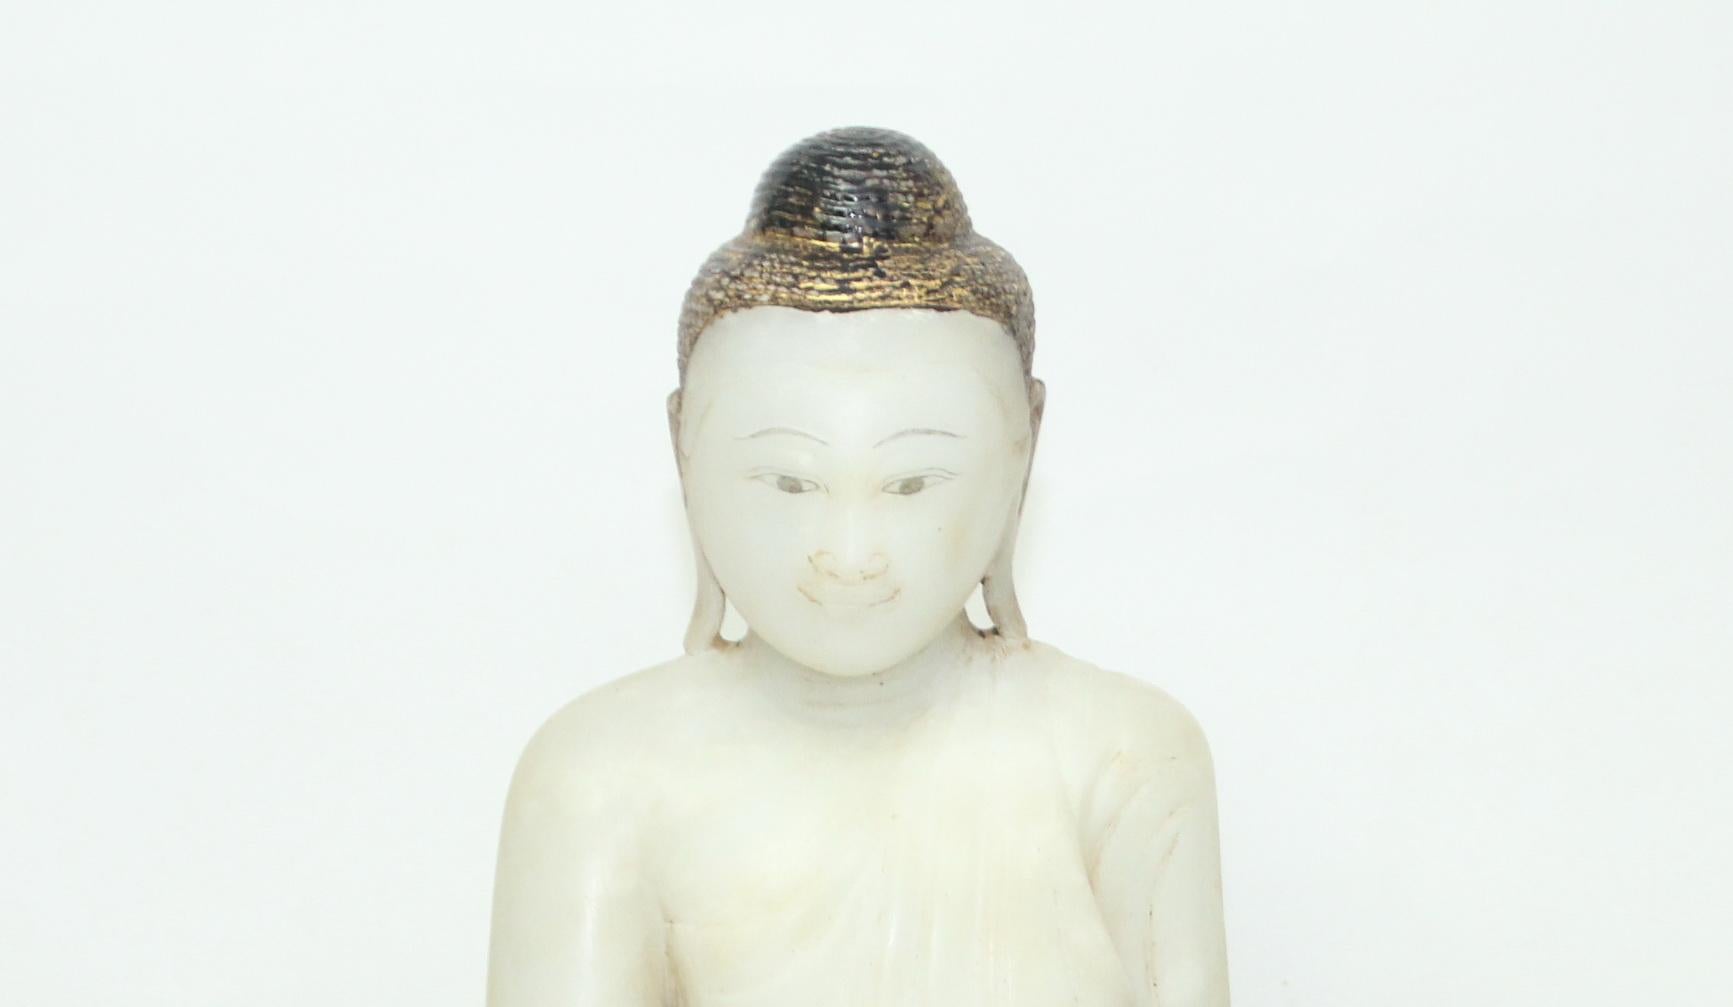 The Buddha is seated on a low, lotus base in vajrasana (lotus) position with bhumisparsha mudra, in which the finger-tips of the right hand touch the earth to symbolize the moment of enlightenment. The Buddha has a serene expression and is clothed